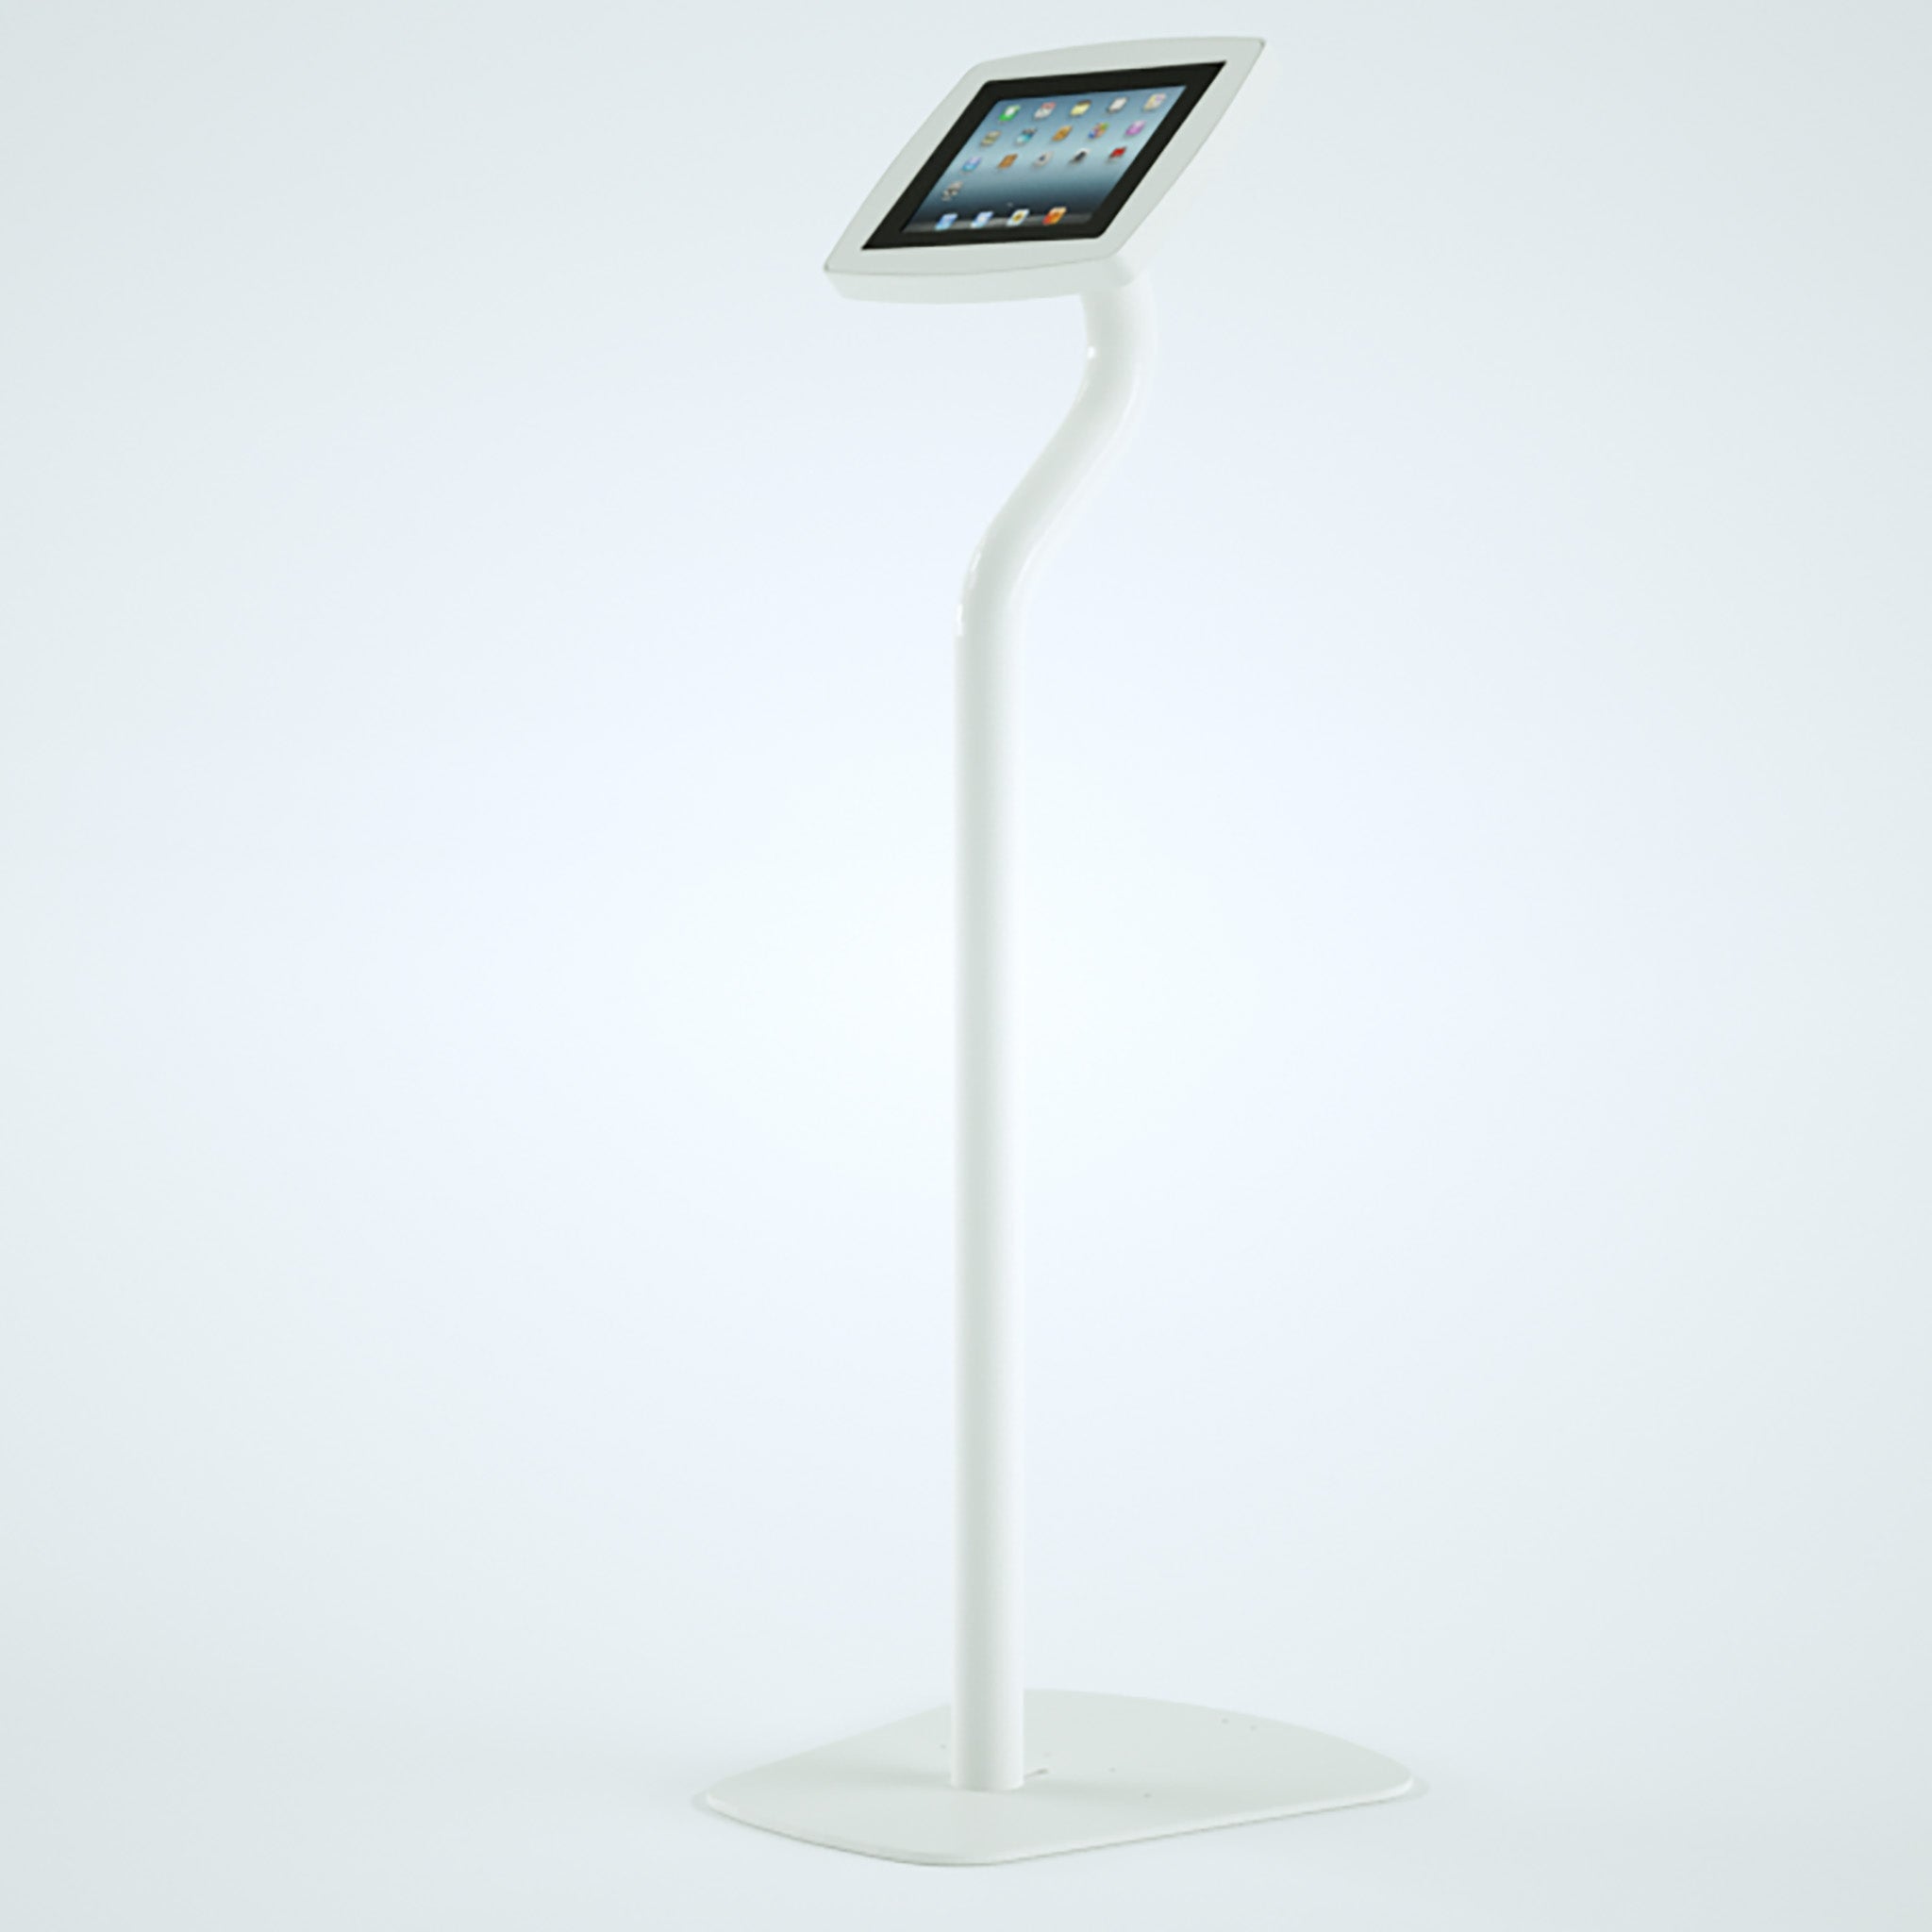 The Floor freestanding iPad and Tablet kiosk in white with a screen tablet display.